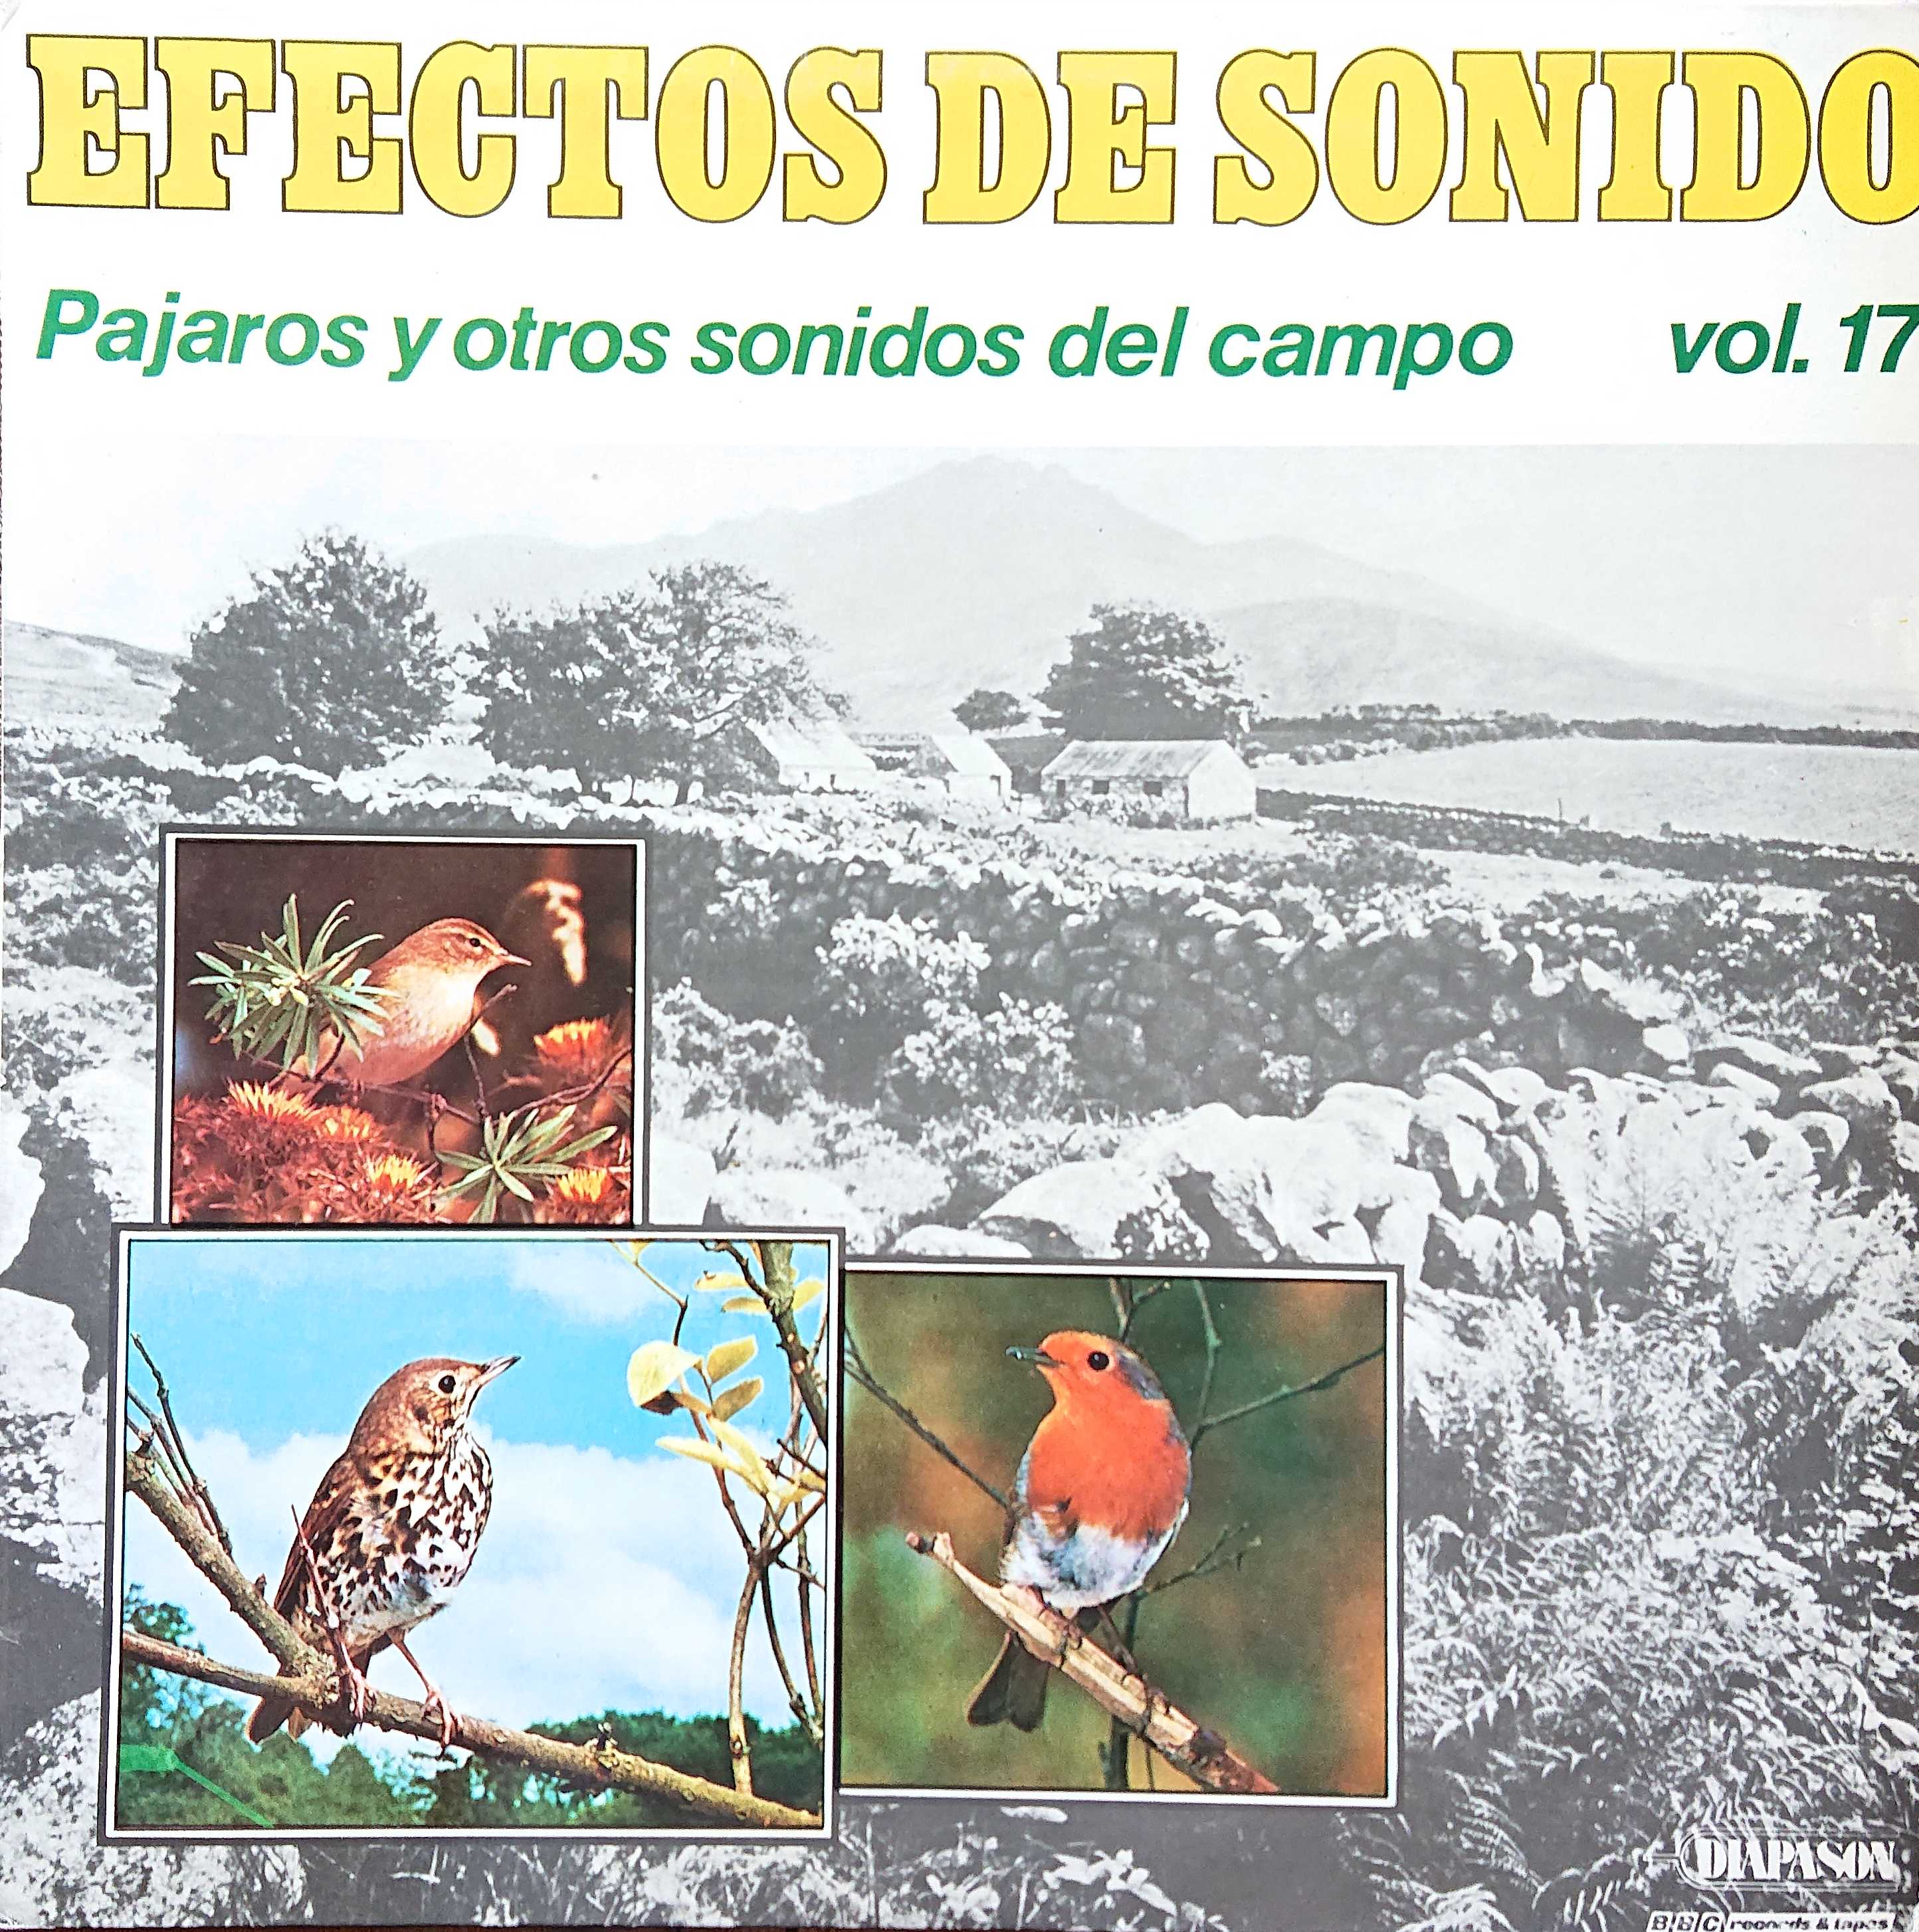 Picture of 51.0121 Efectos De Sonido Vol. 17 (Spanish import) by artist Unknown from the BBC albums - Records and Tapes library